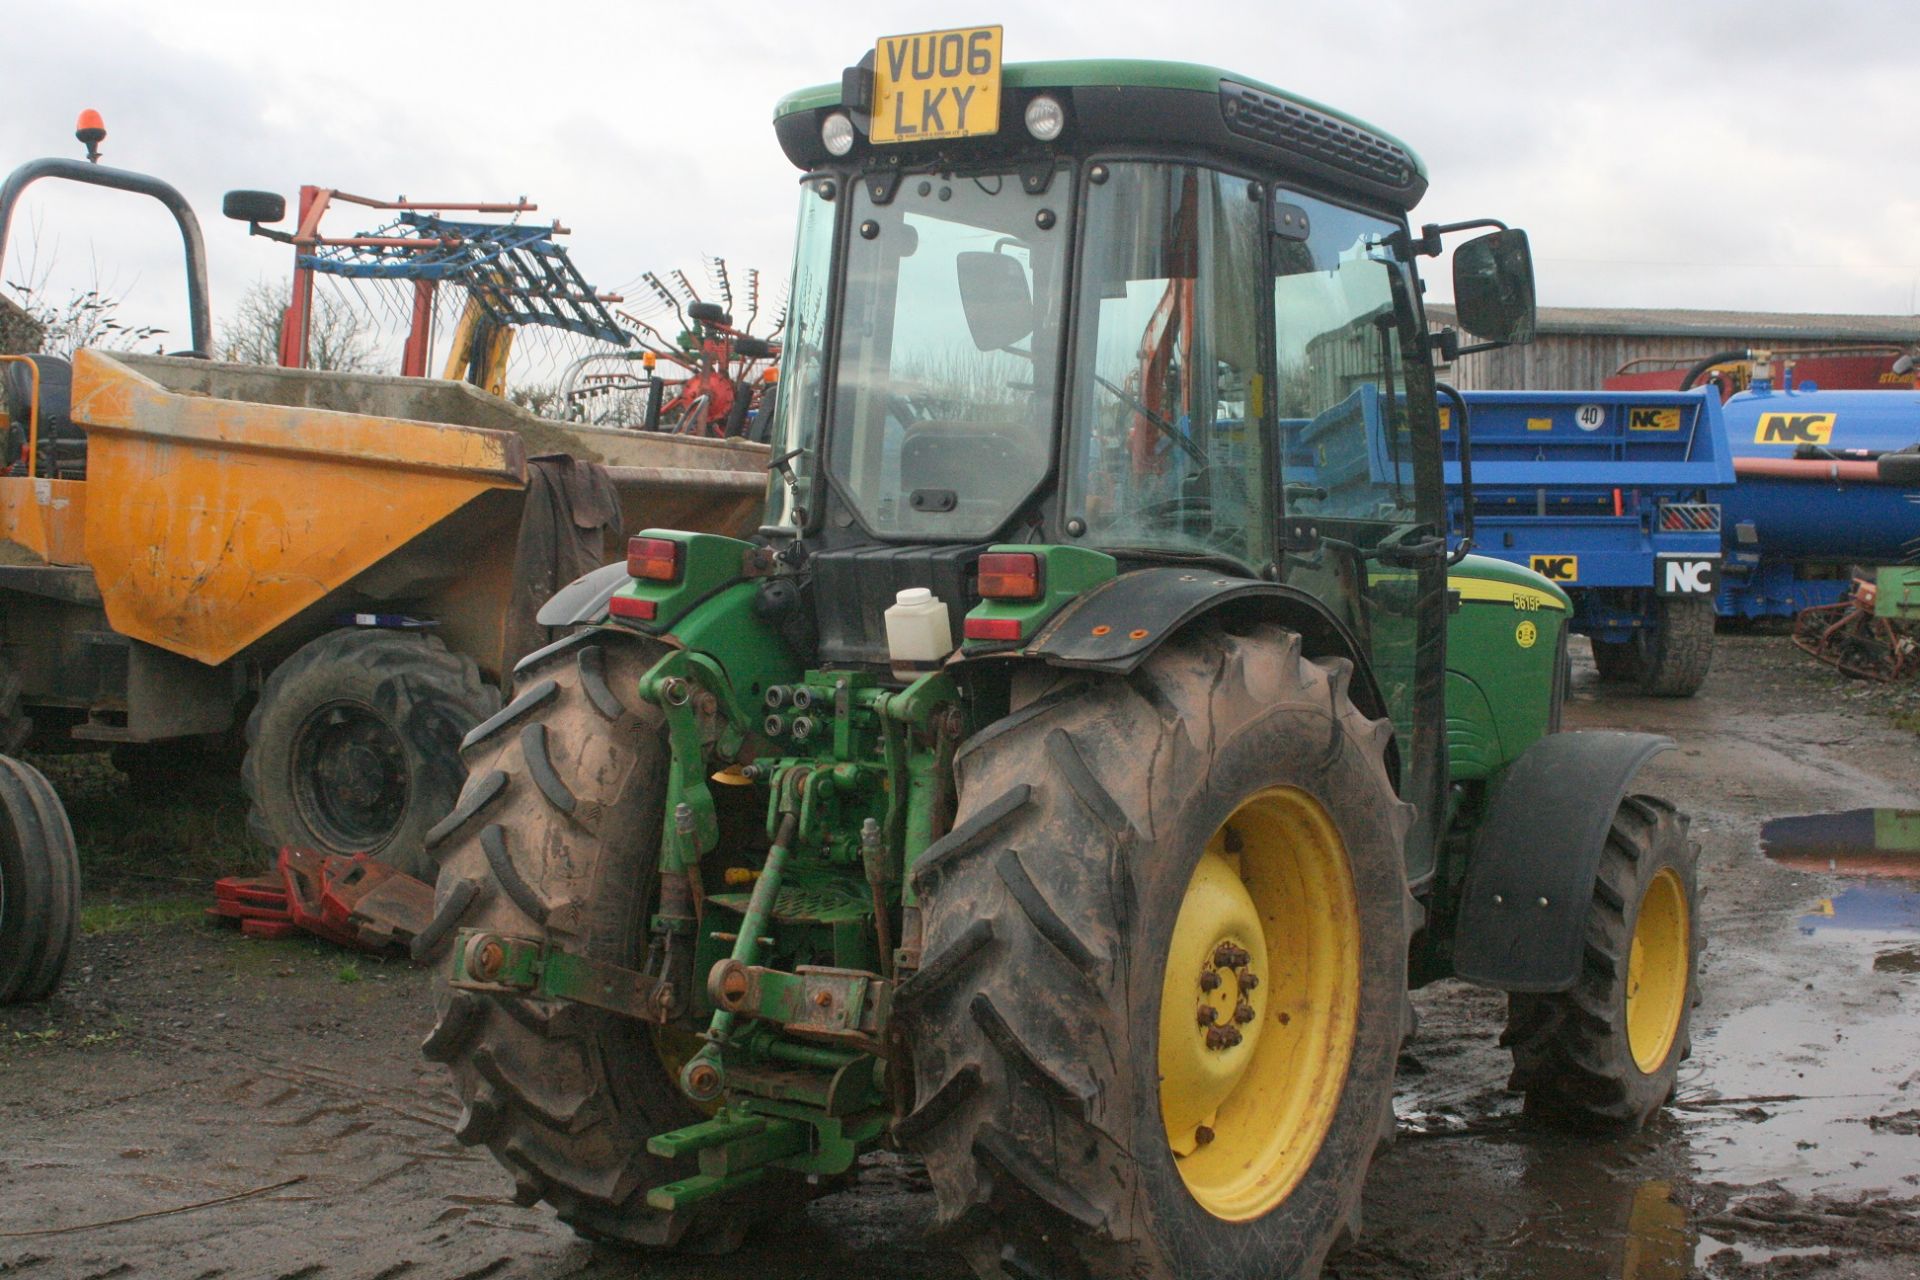 JOHN DEERE 5615F TRACTOR, SHOWING 4073 HOURS, GOOD CONDITION, GOOD YEAR TYRES, READY FOR WORK - Image 5 of 8